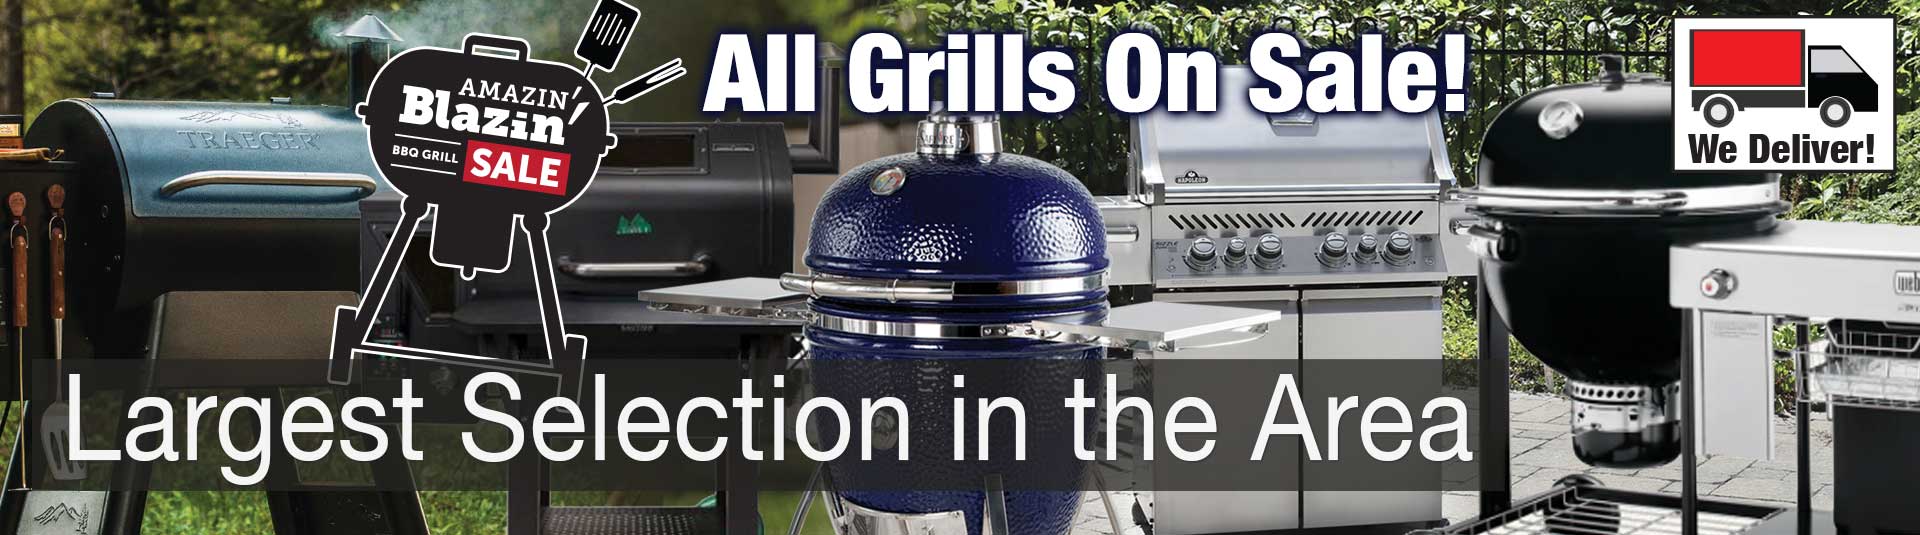 All BBQ Grills ON SALE at Benson Stone Company during their Amazin' Blazin' BBQ Grill Sale! Pellet grills, smokers, charcoal grills, gas grills...all on sale!